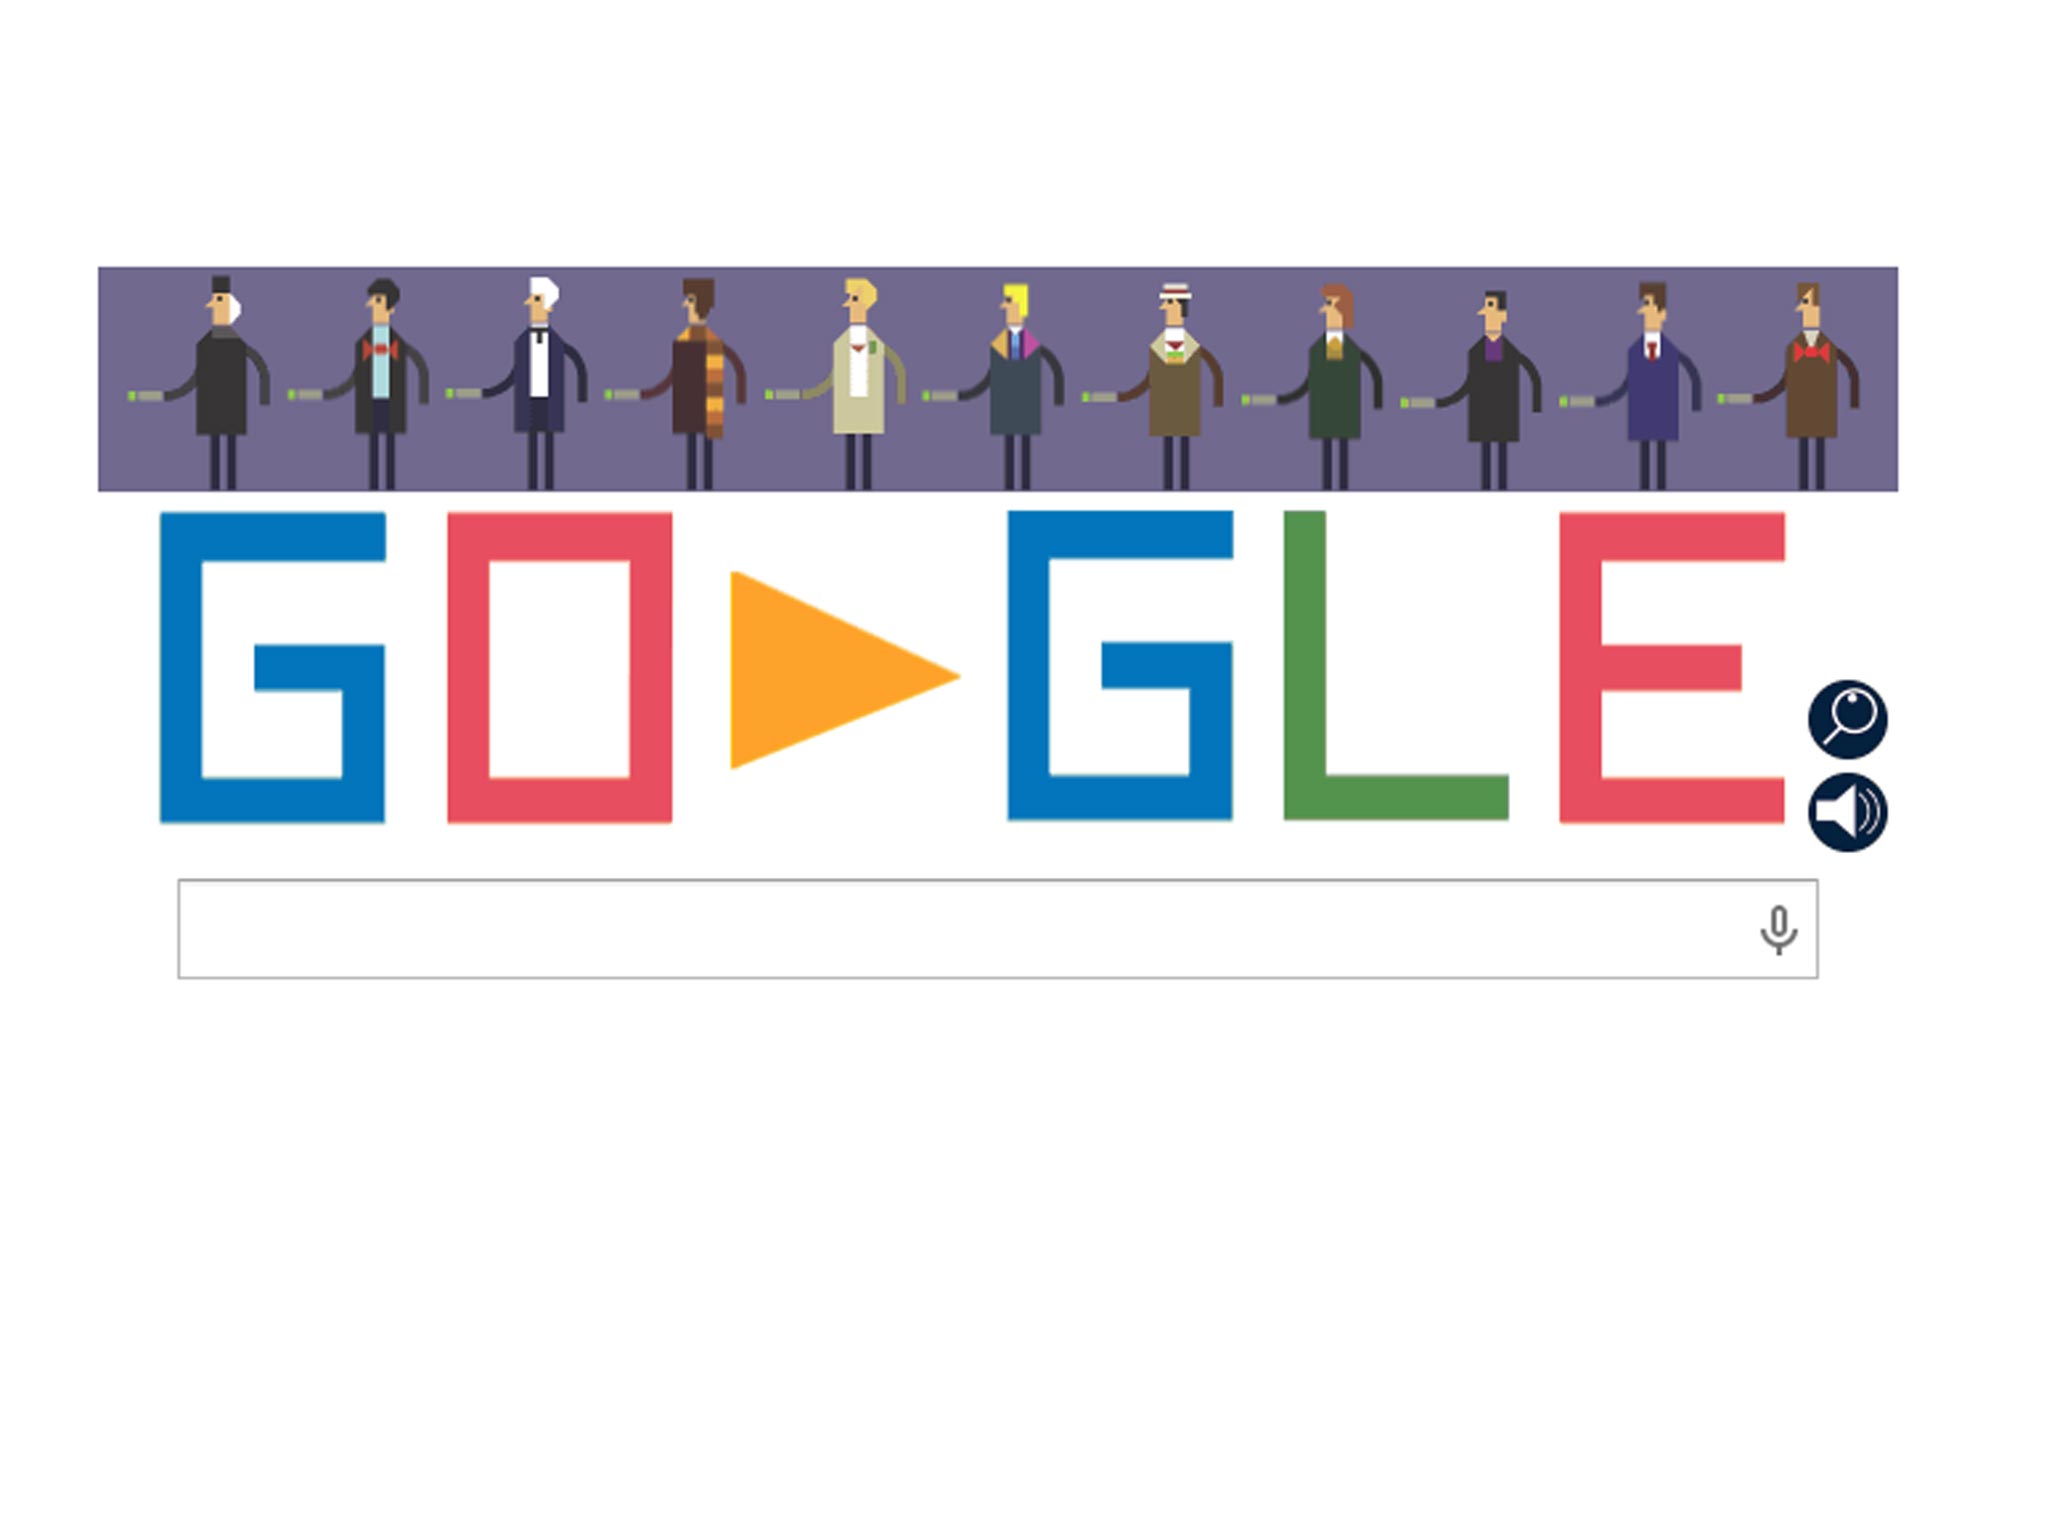 22 November 2013: Today's Google Doodle celebrates 50 years of Doctor Who